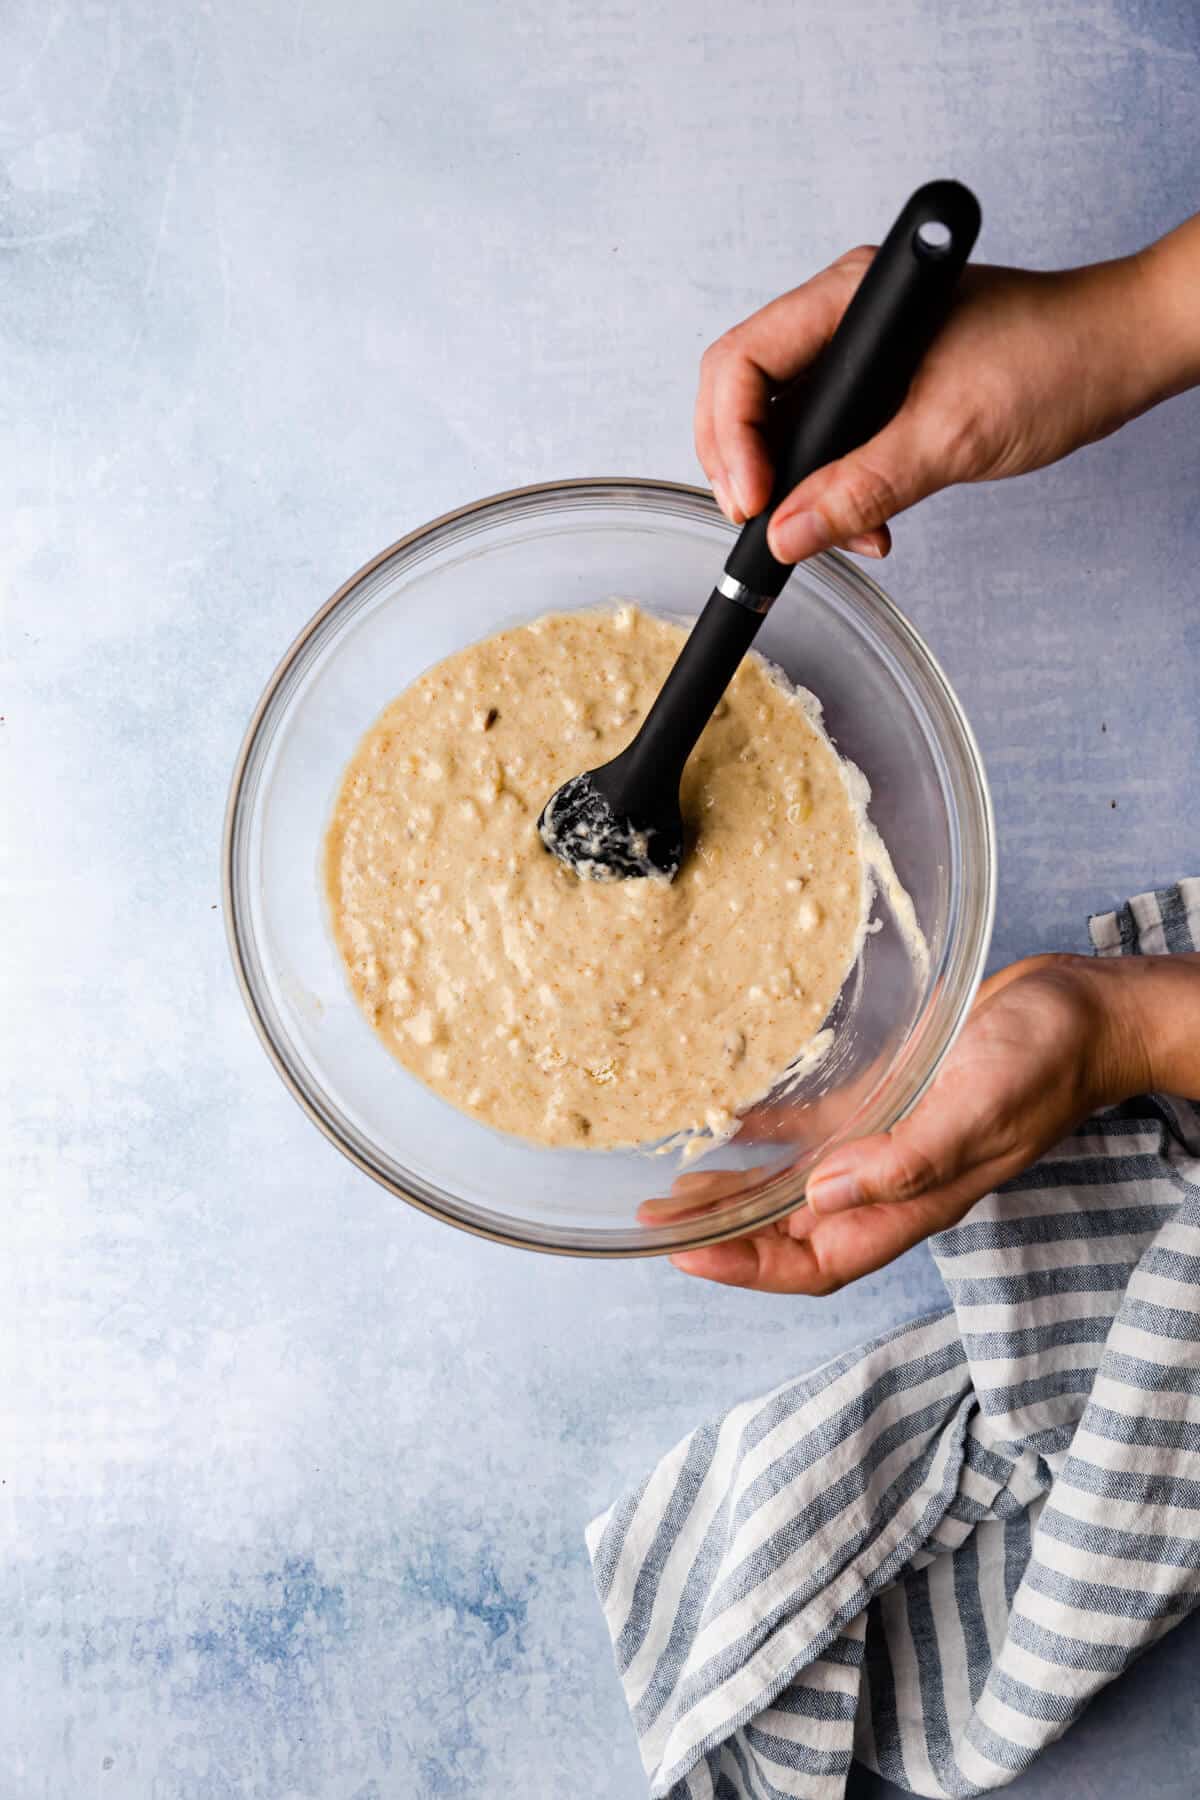 top view of a person mixing the batter in a bowl with spatula